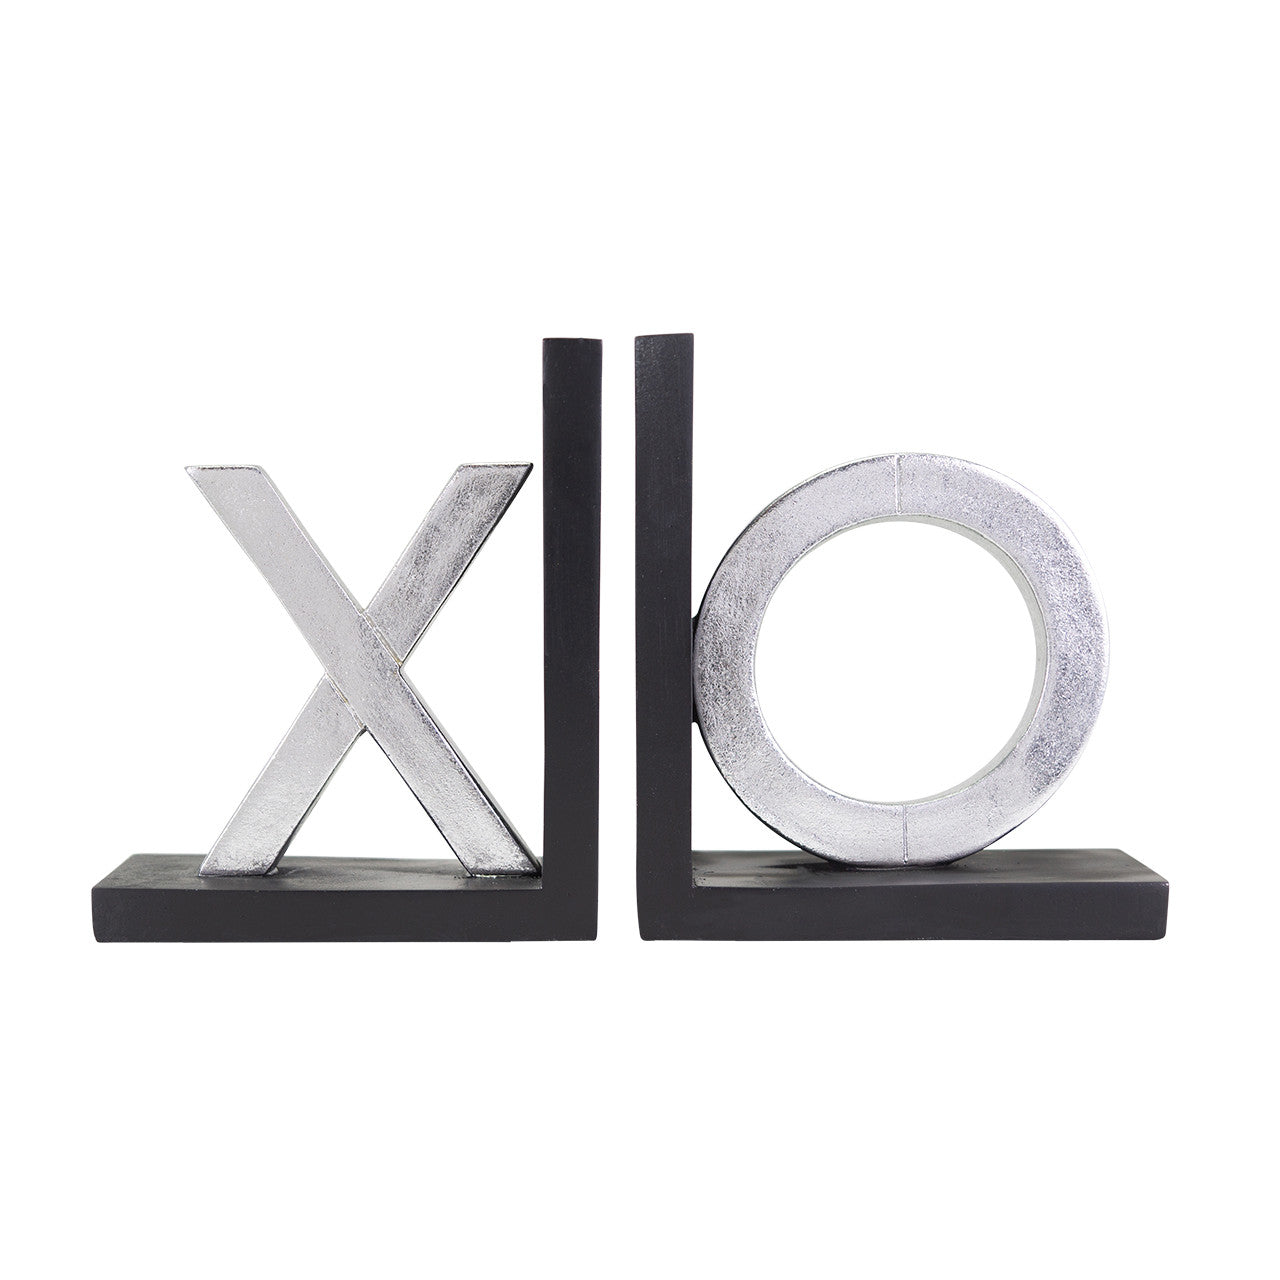 Set of X and O Bookends